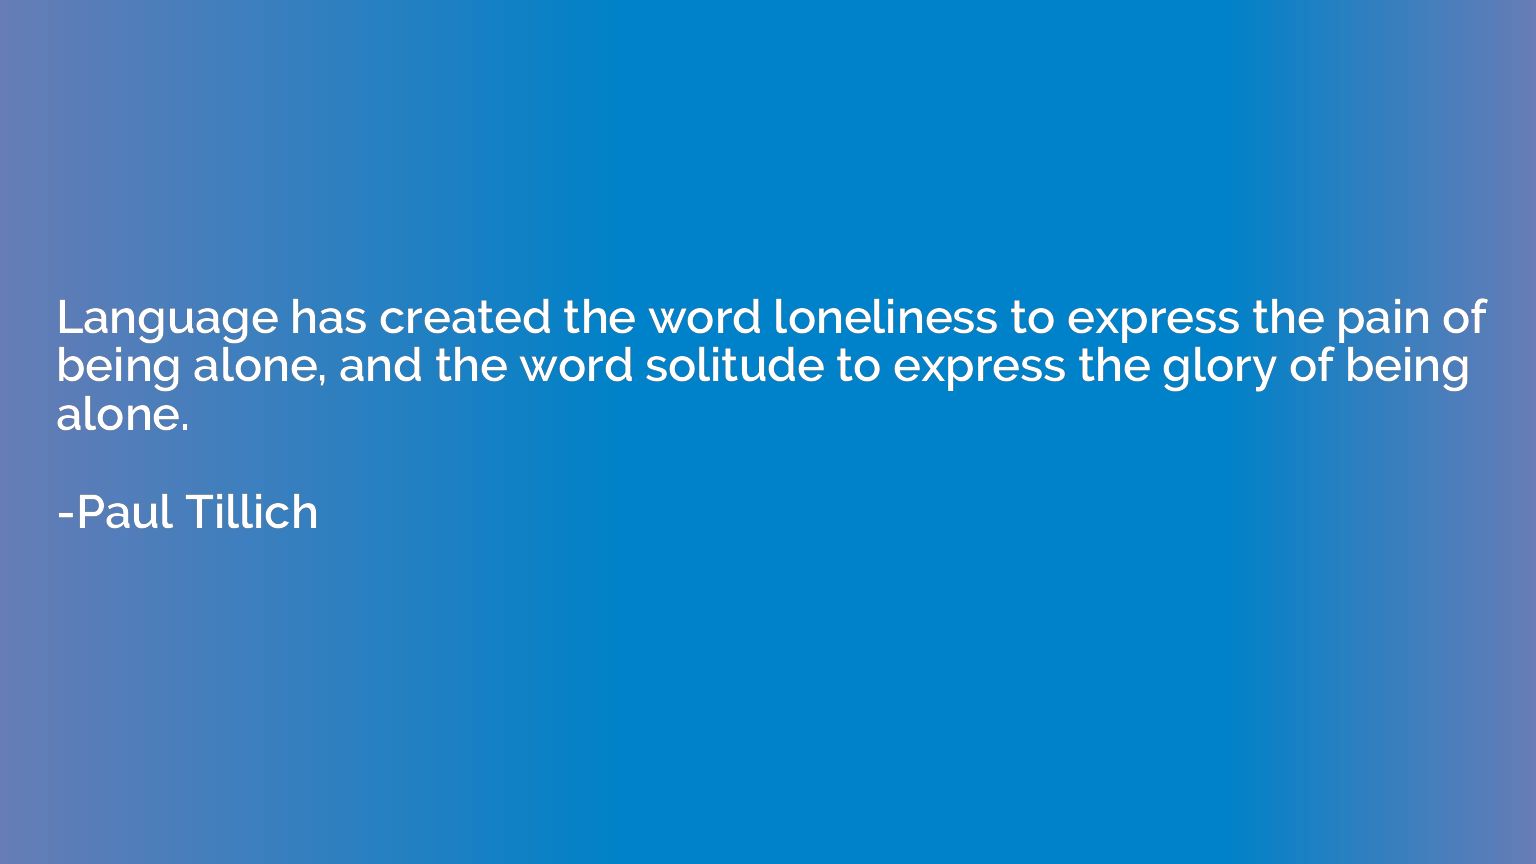 Language has created the word loneliness to express the pain